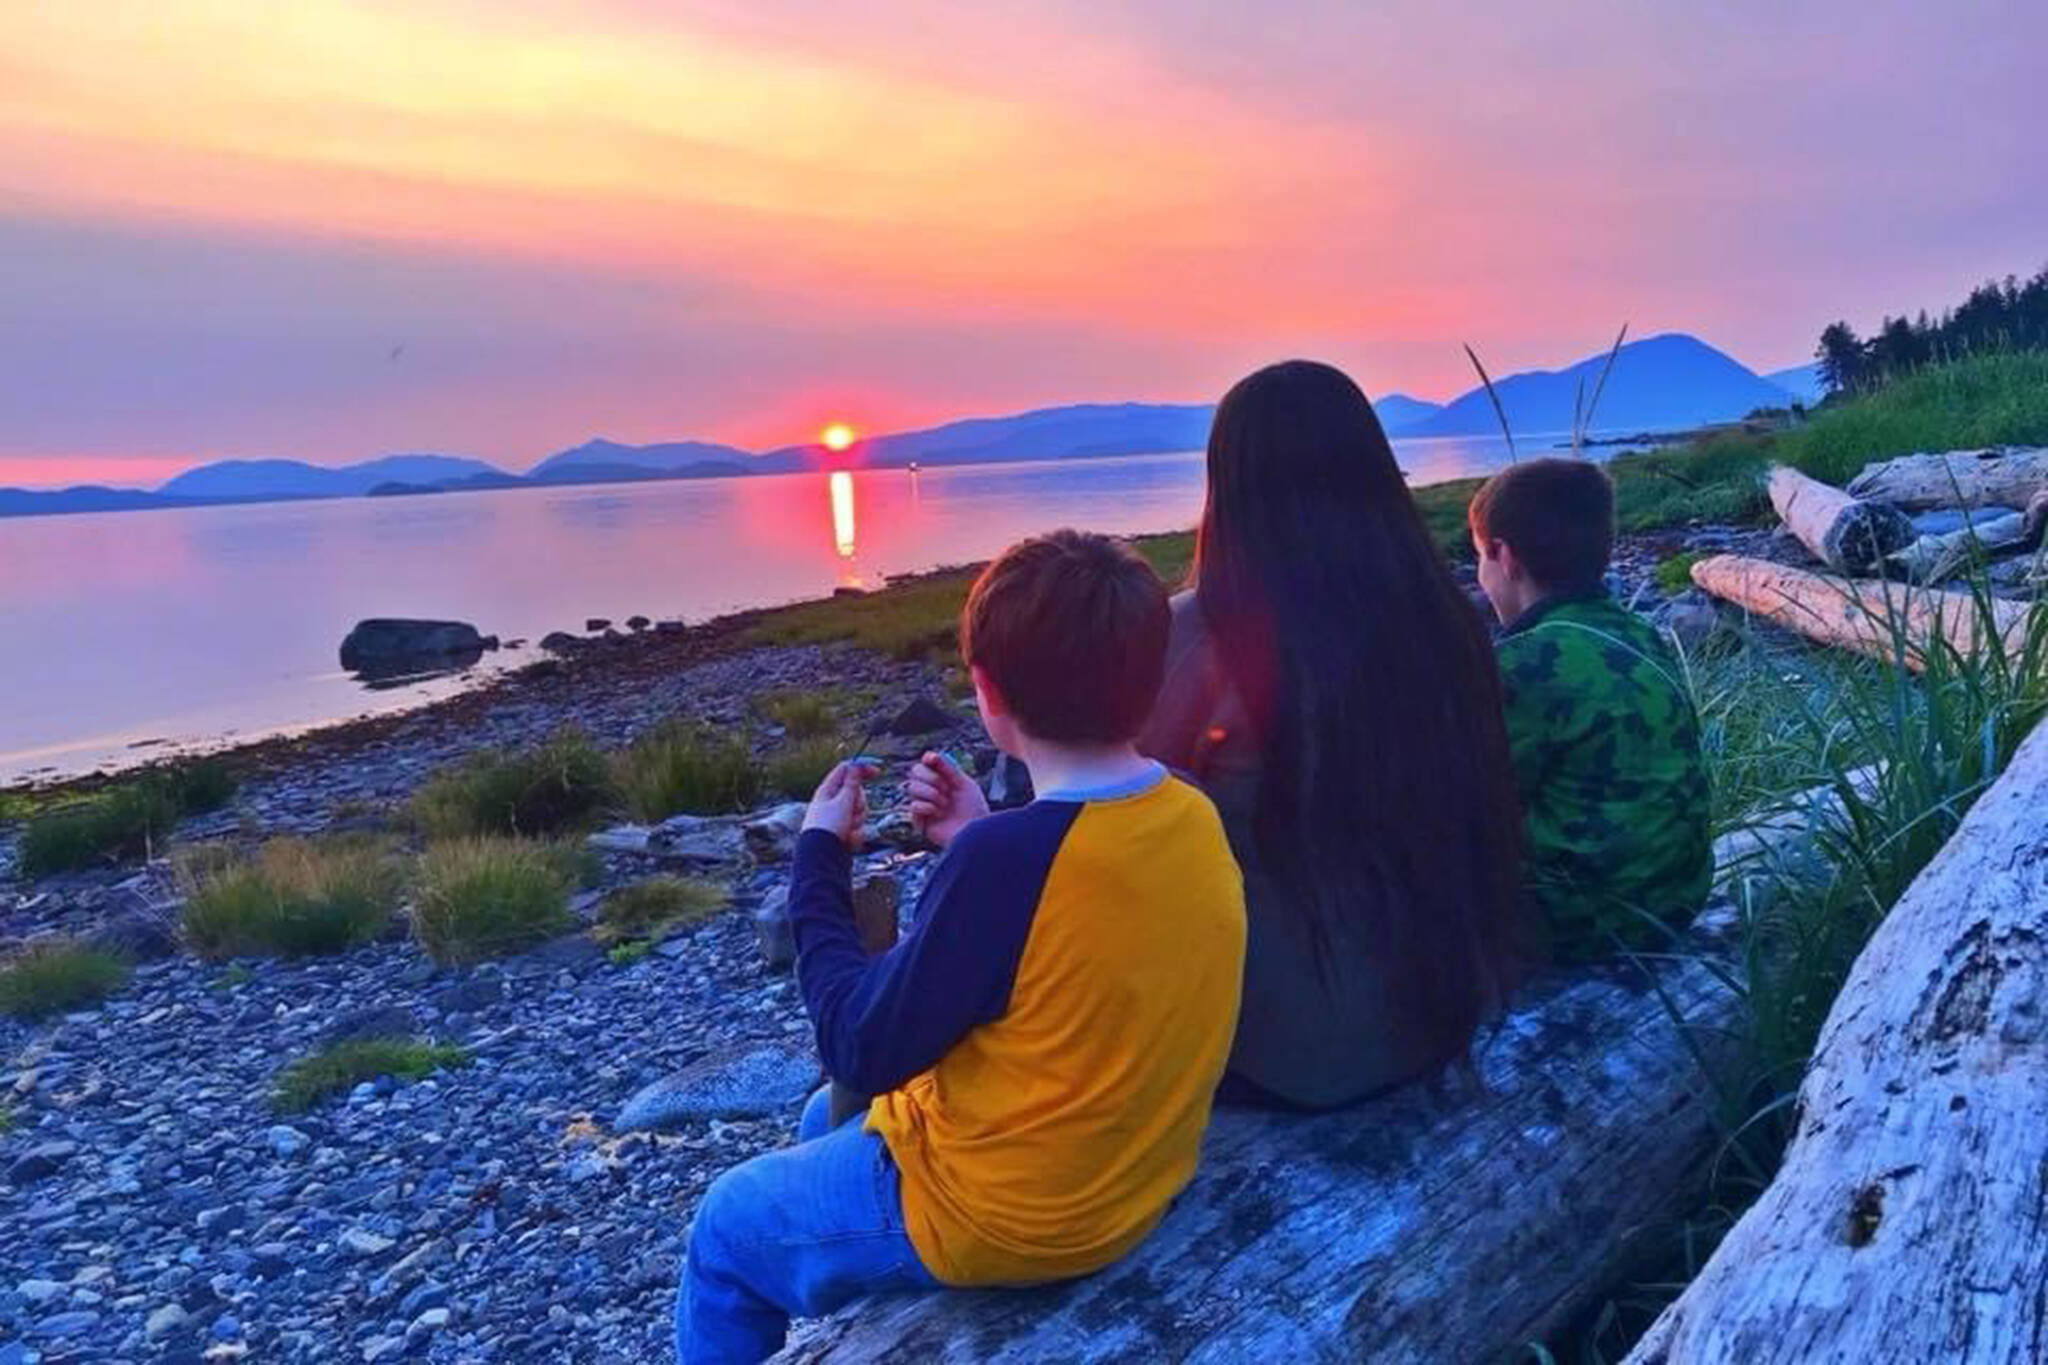 Yeilk’ Vivian Mork sits watching a sunset with nephews Timothy and Jackson Person, Wrangell. (Vivian Faith Prescott / For the Capital City Weekly)